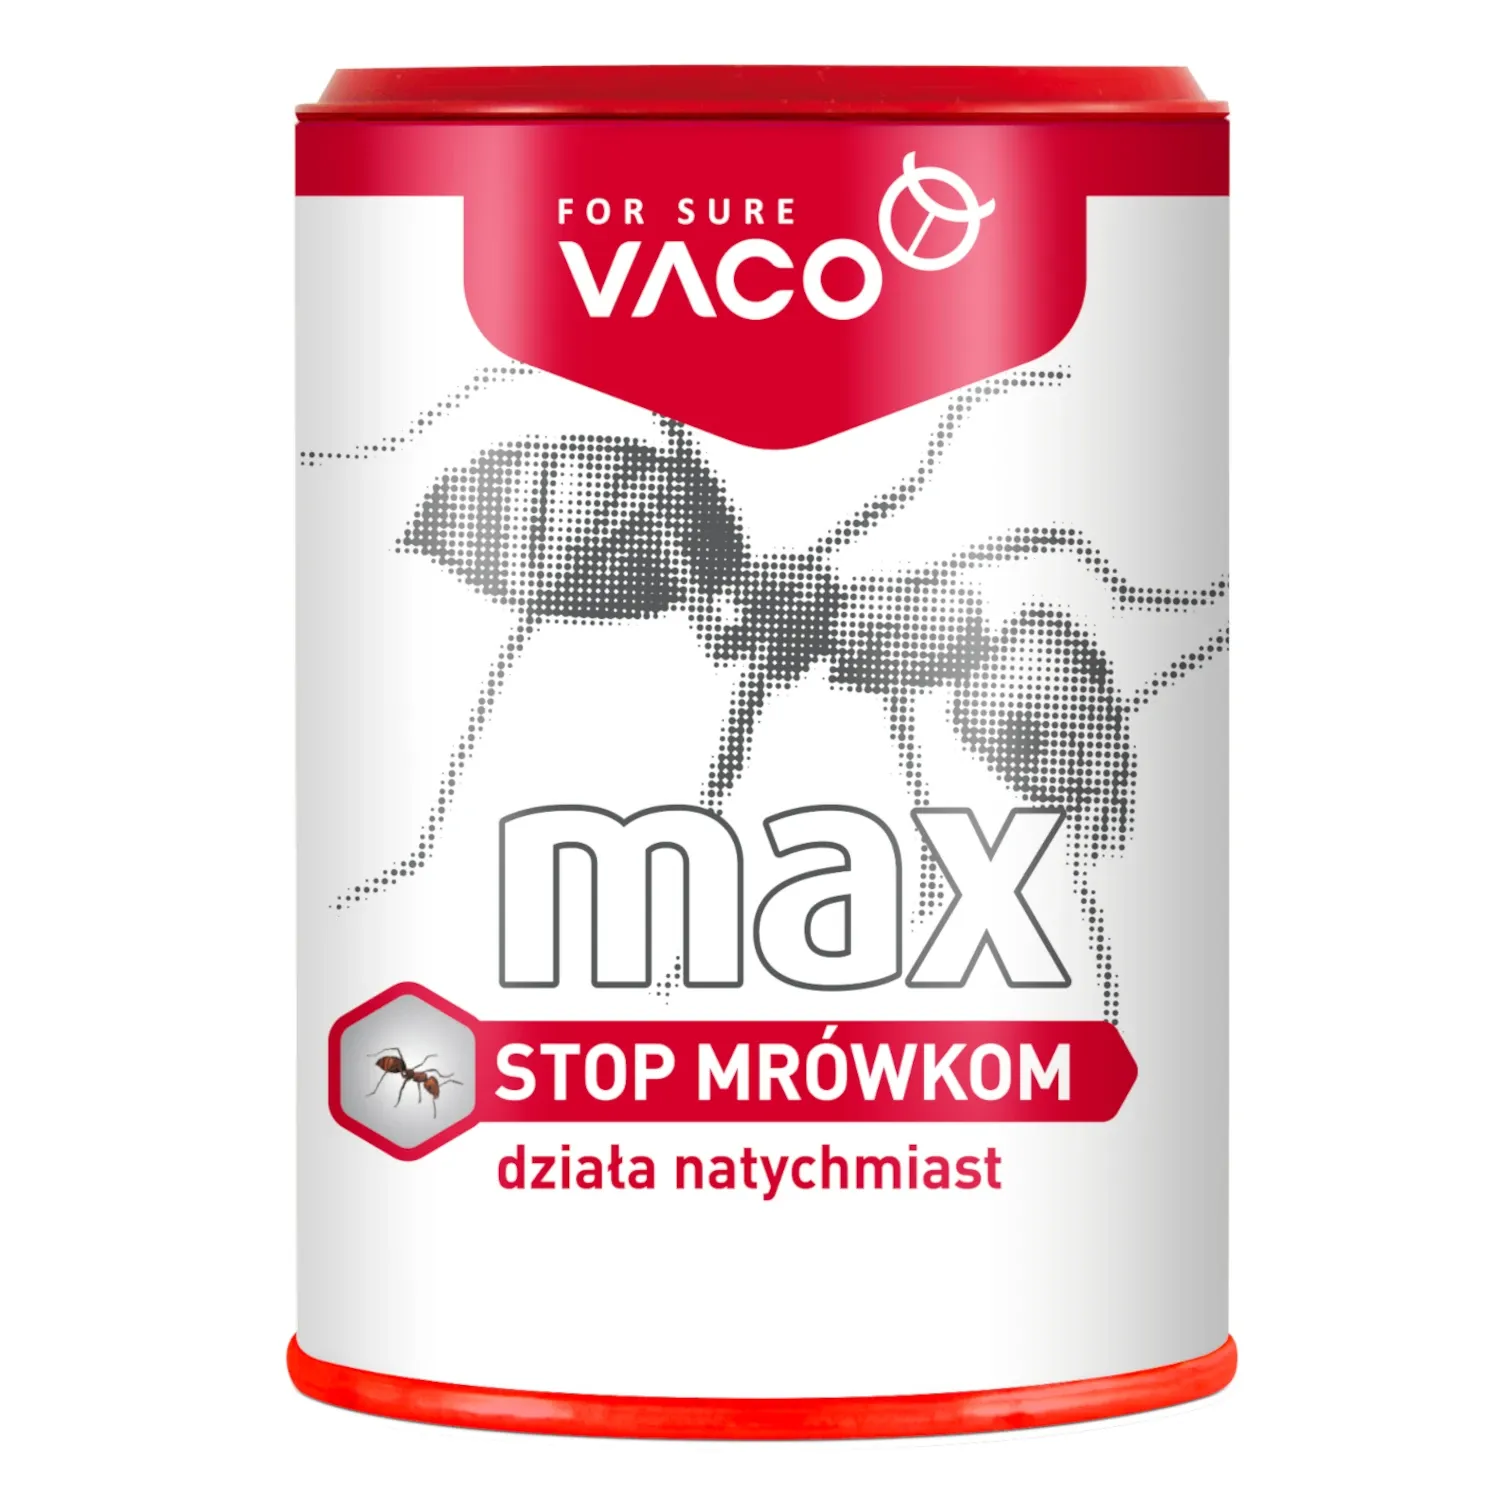 VACO Powder for ants 100 g